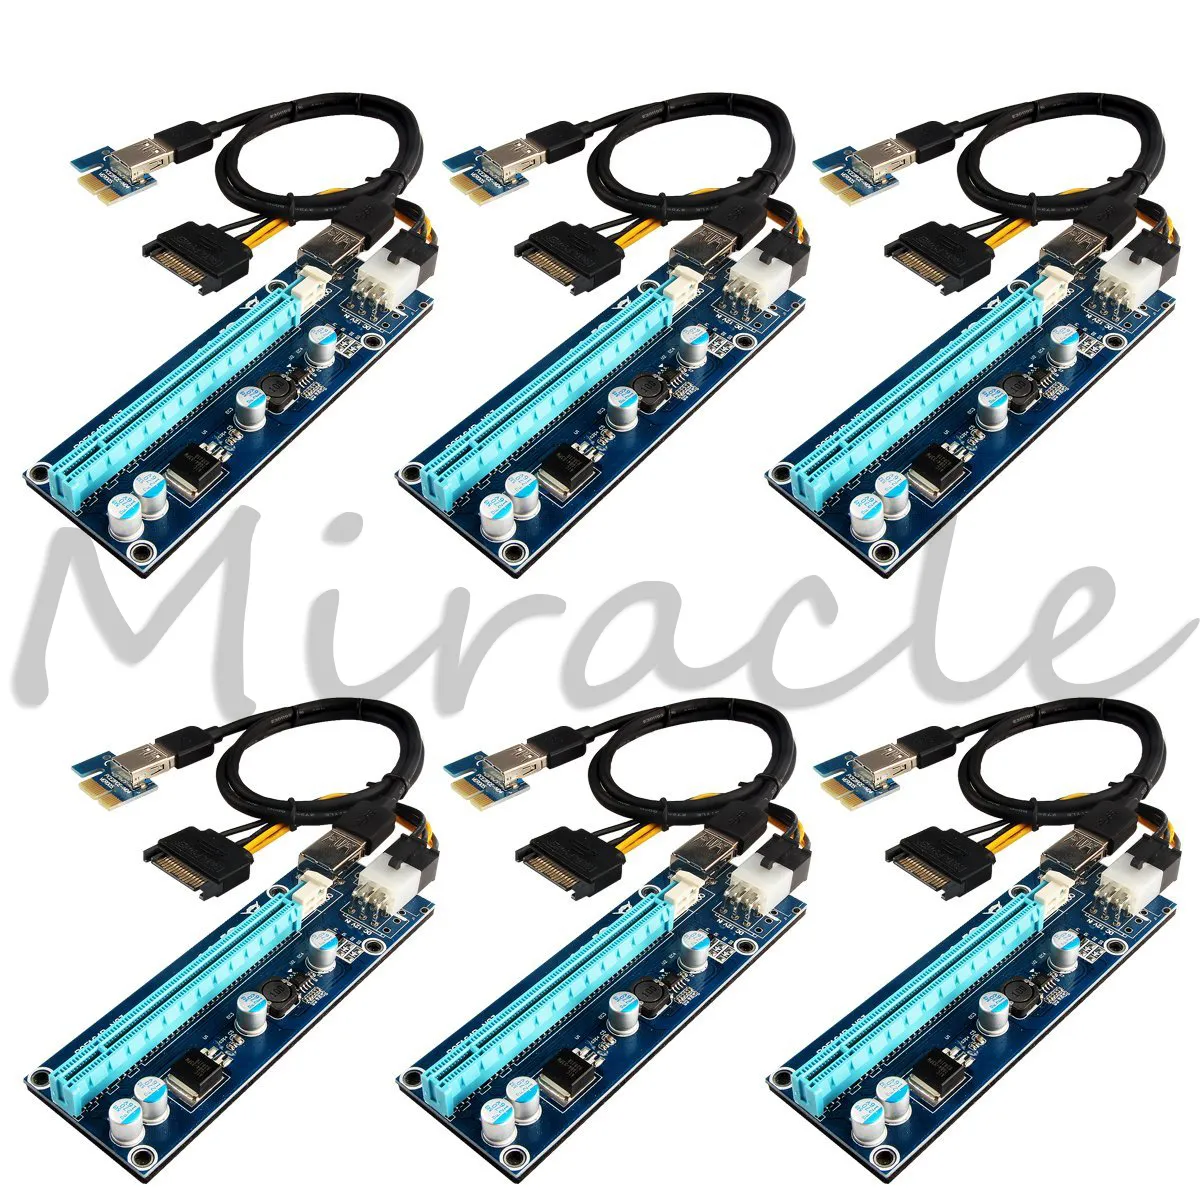 6-Pack PCI-E 1X to 16X Riser Cable Adapter, USB 3.0 60cm Cable, GPU graphics card Extension Cable,SATA Cable